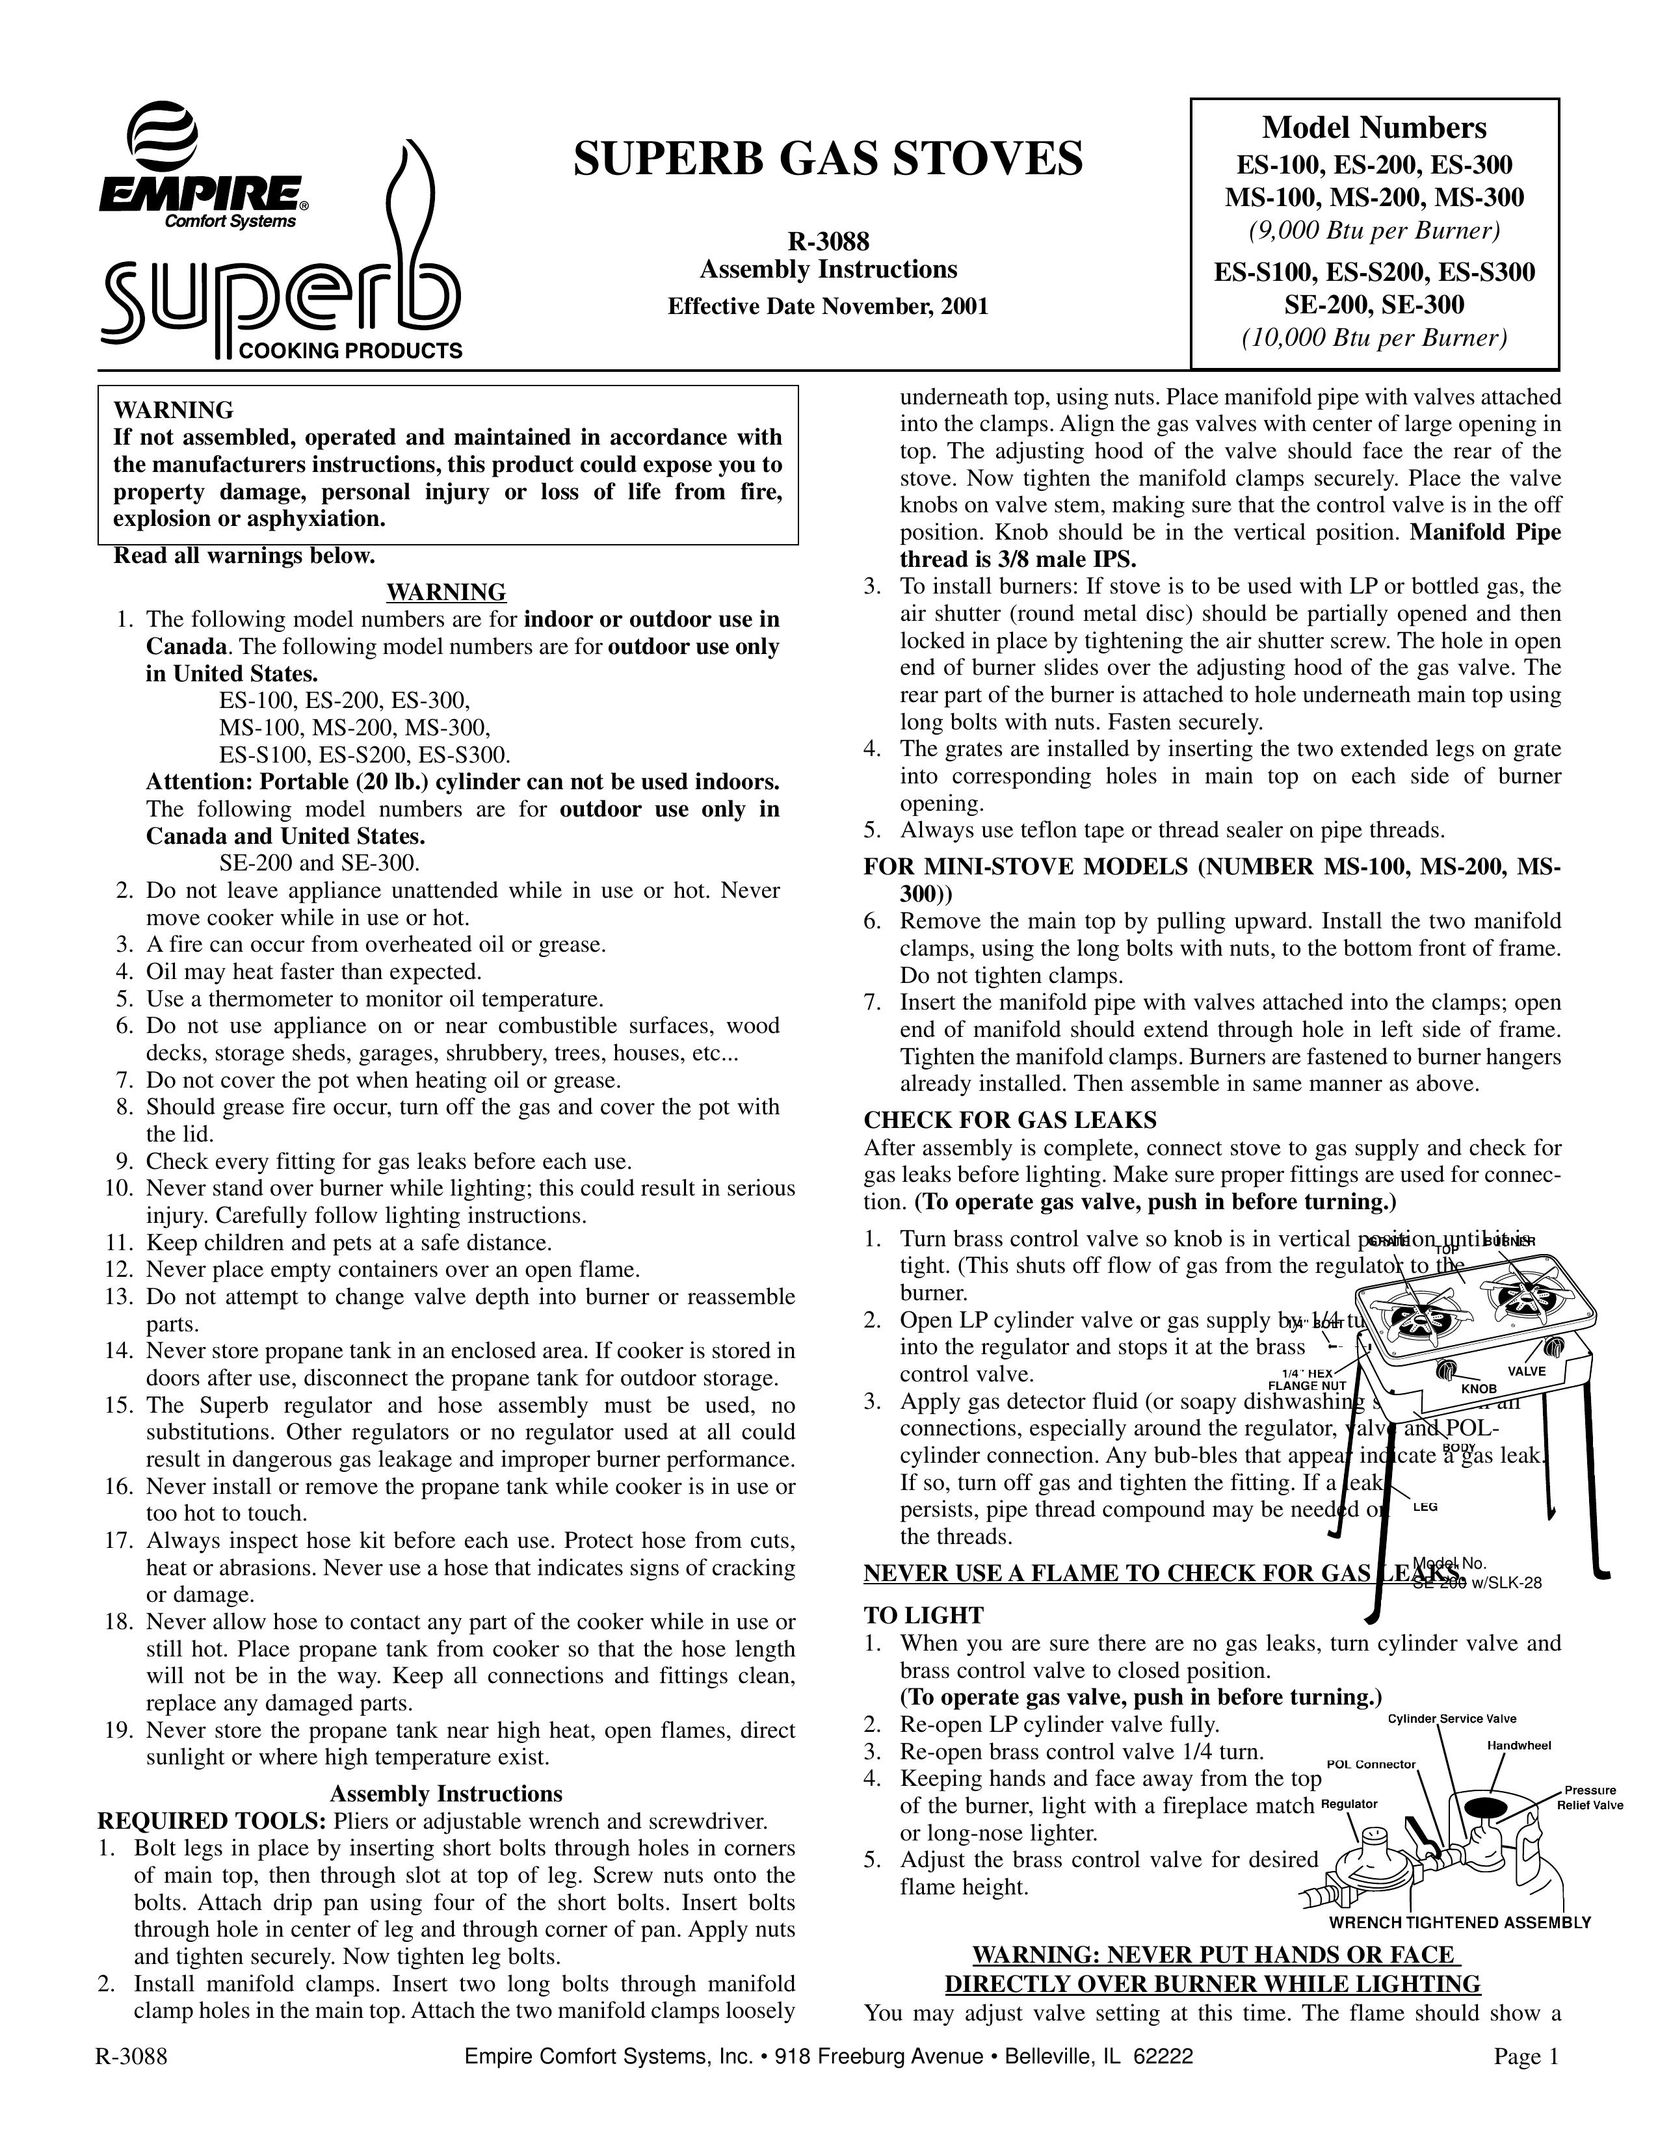 Empire Comfort Systems MS-100 Stove User Manual